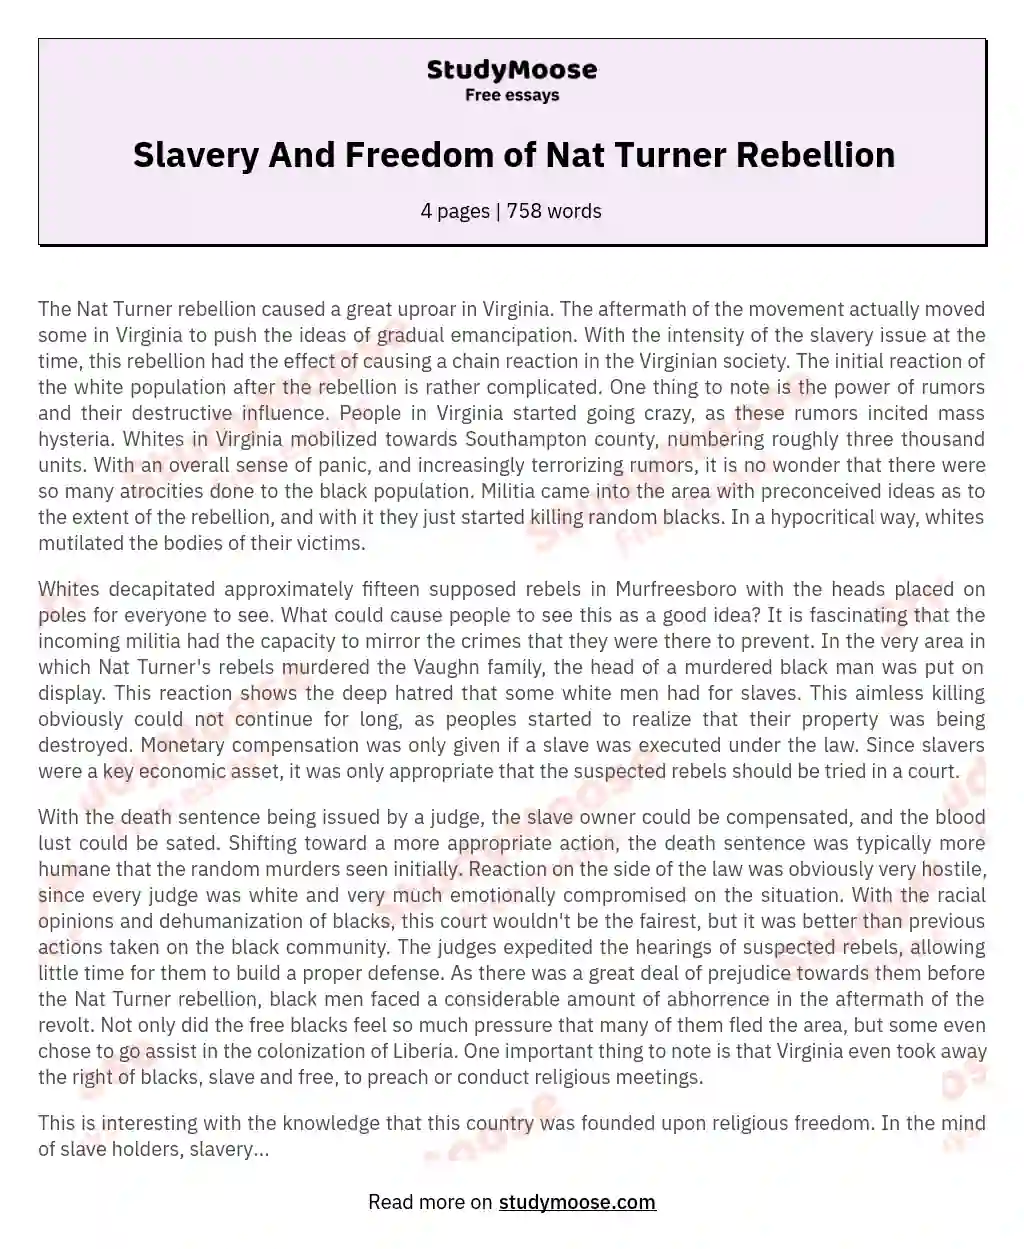 The Aftermath of the Nat Turner Rebellion in Virginia: A Complex Chain Reaction essay